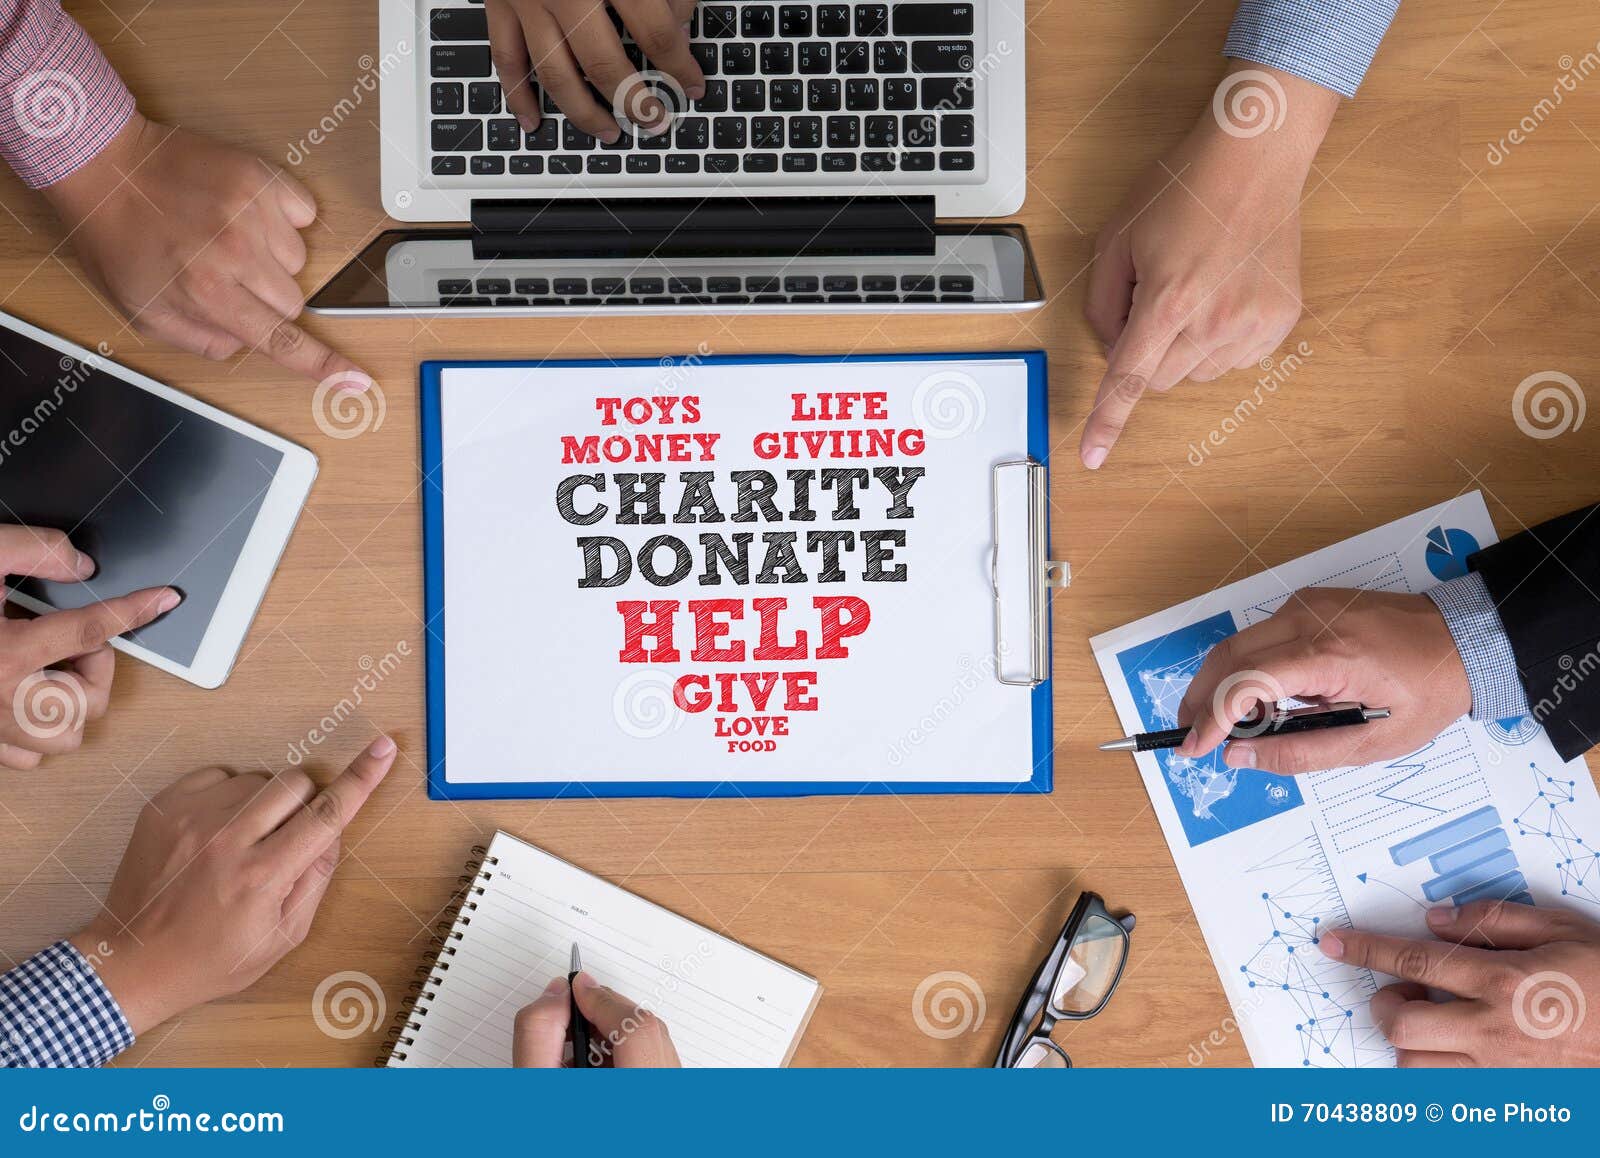 Charity Donate Give Concept Stock Image Image Of Connection